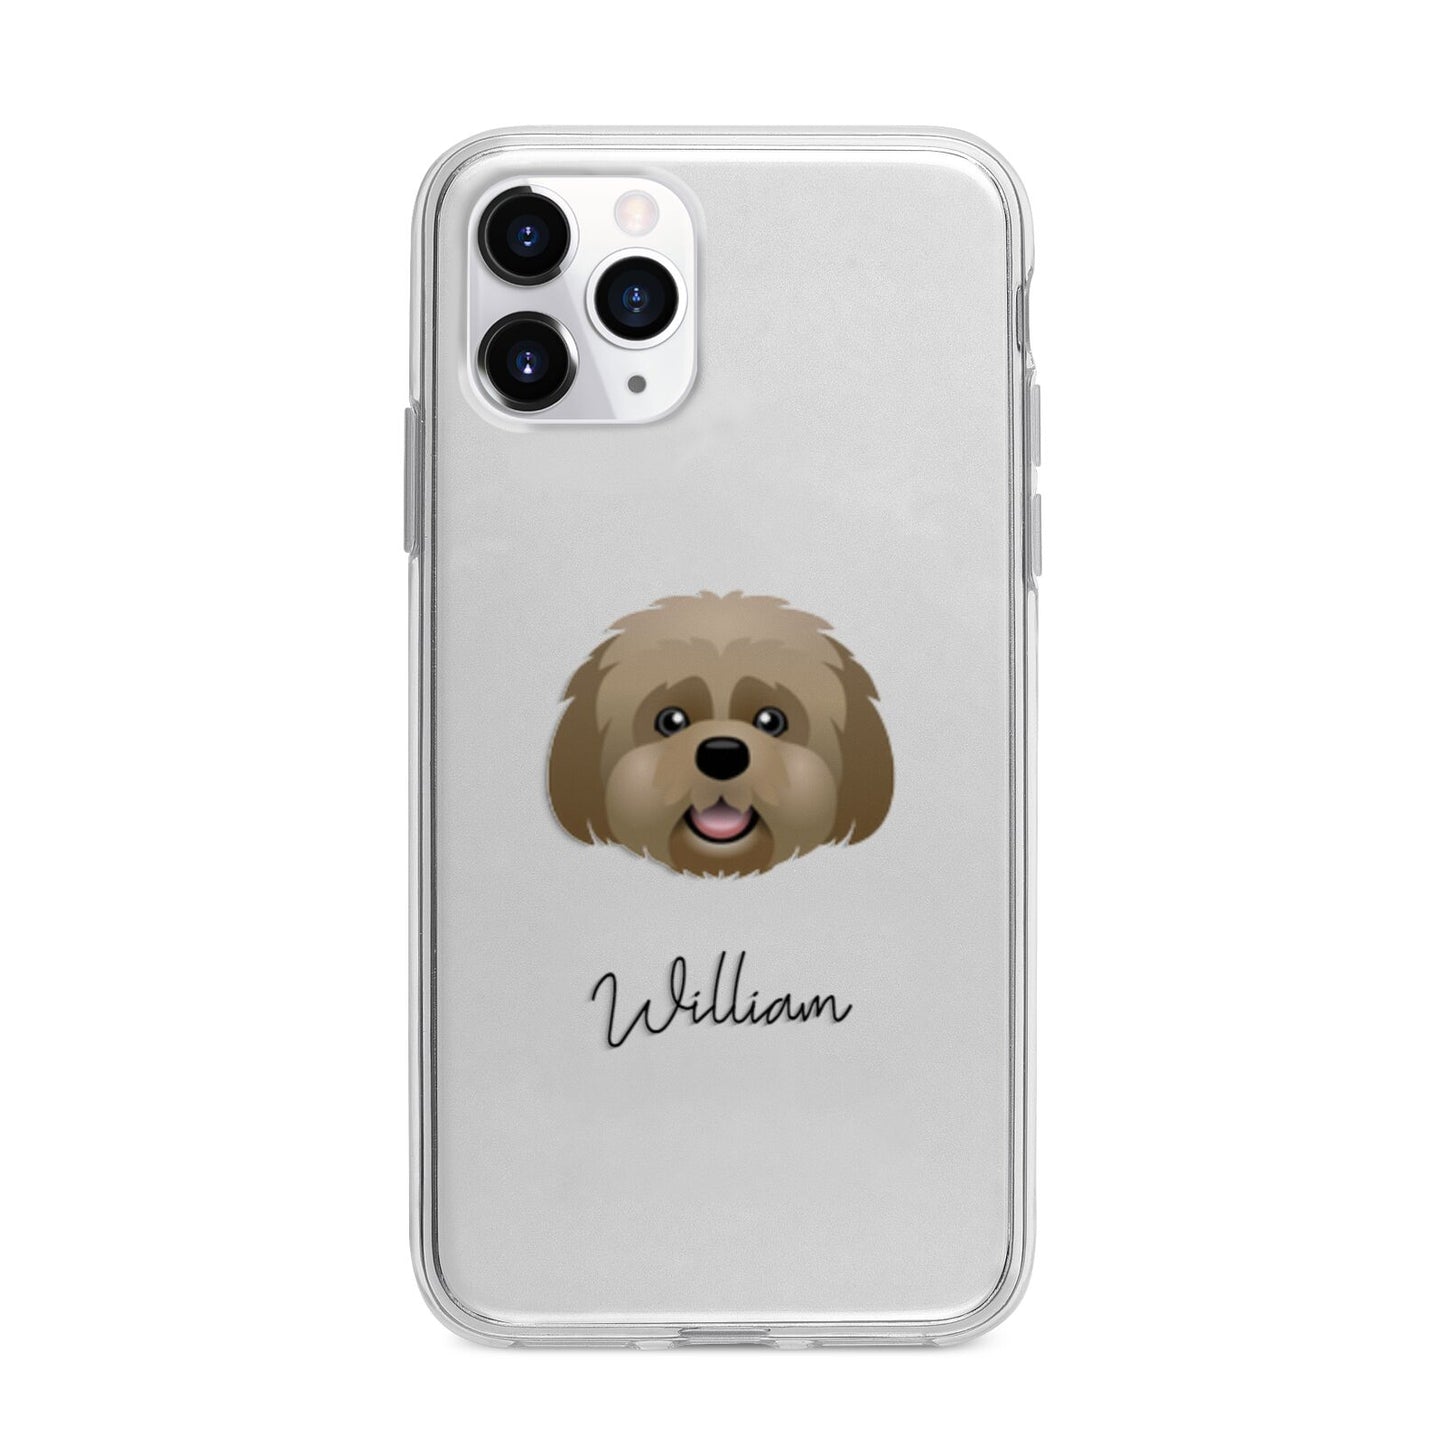 Lhatese Personalised Apple iPhone 11 Pro in Silver with Bumper Case